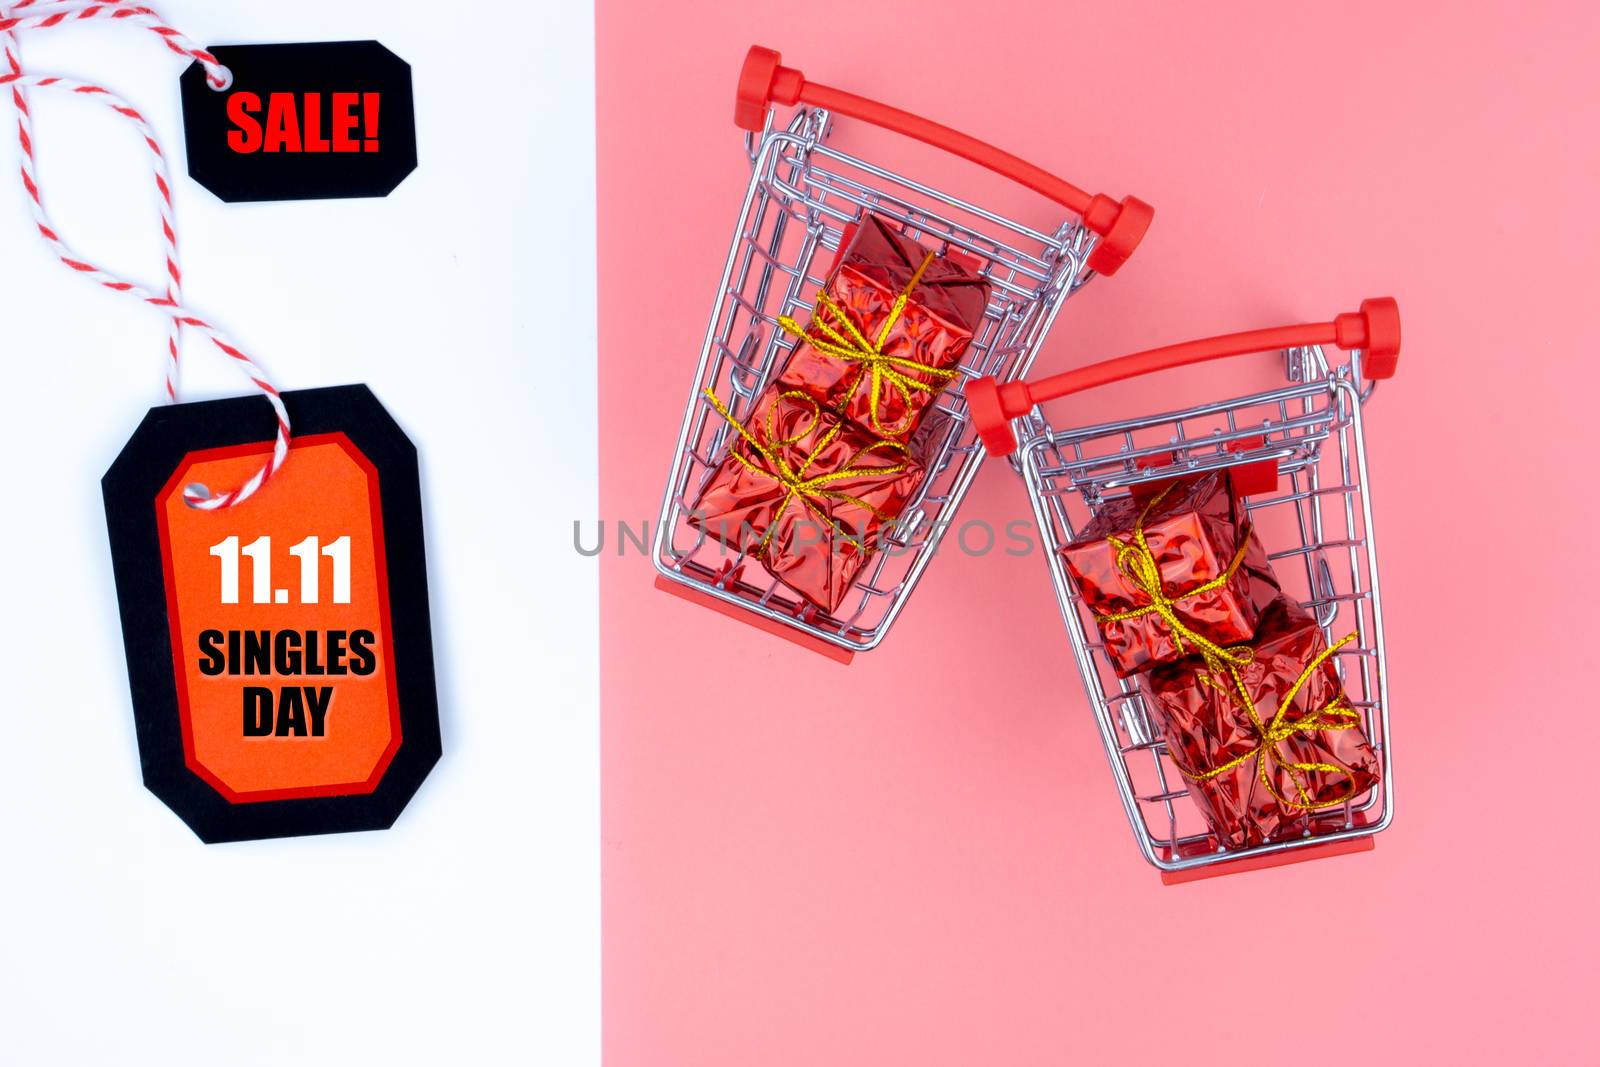 Online shopping of China, The shopping cart and Christmas boxes with red ribbon and shopping tag on a pink and white background with copy space for text. 11.11 single's day sale concept